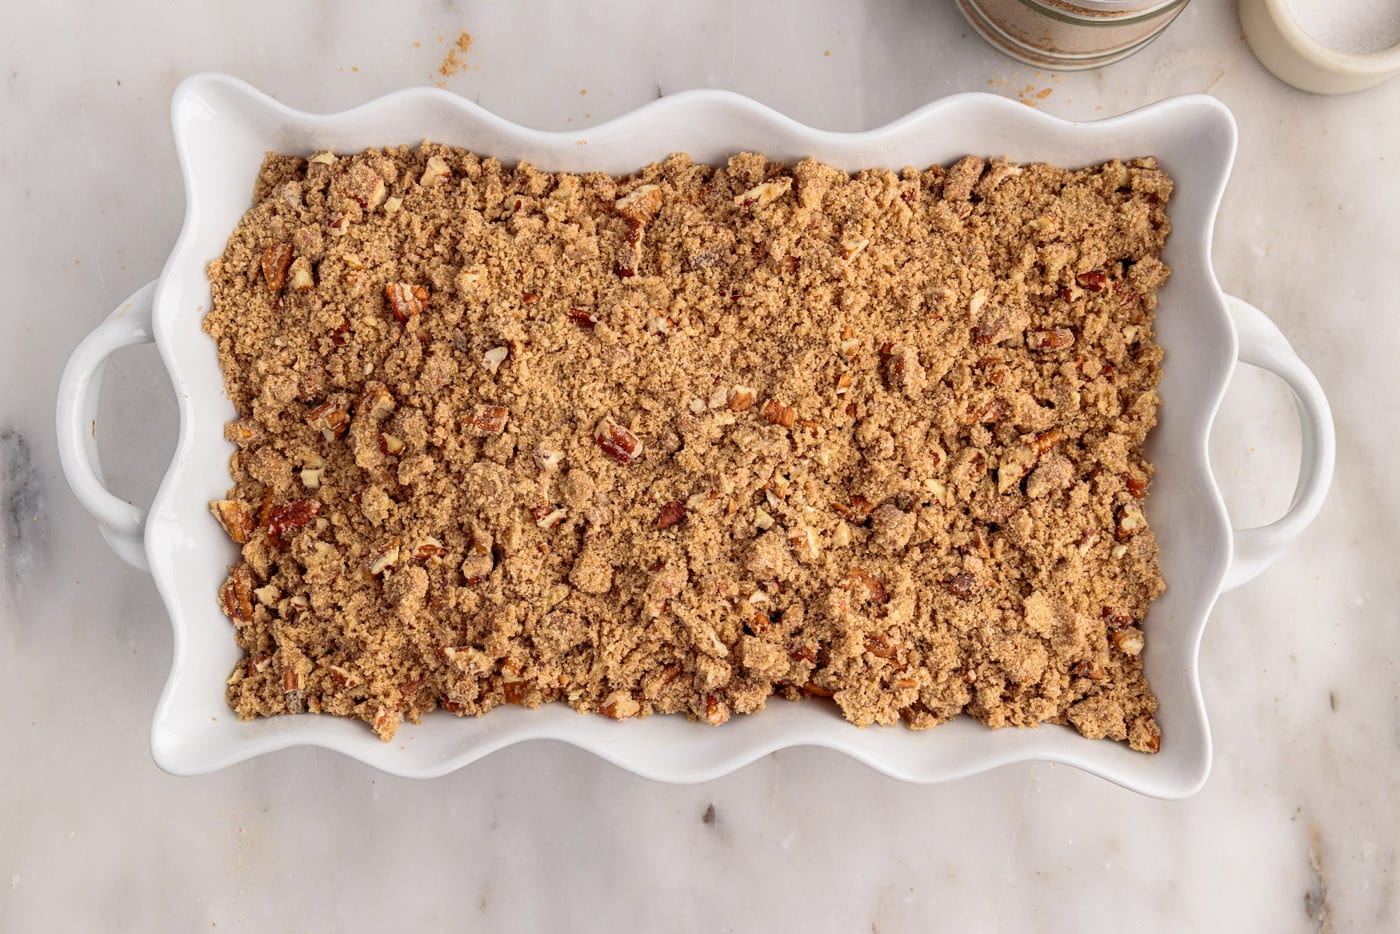 sweet potato souffle with pecan streusel topping